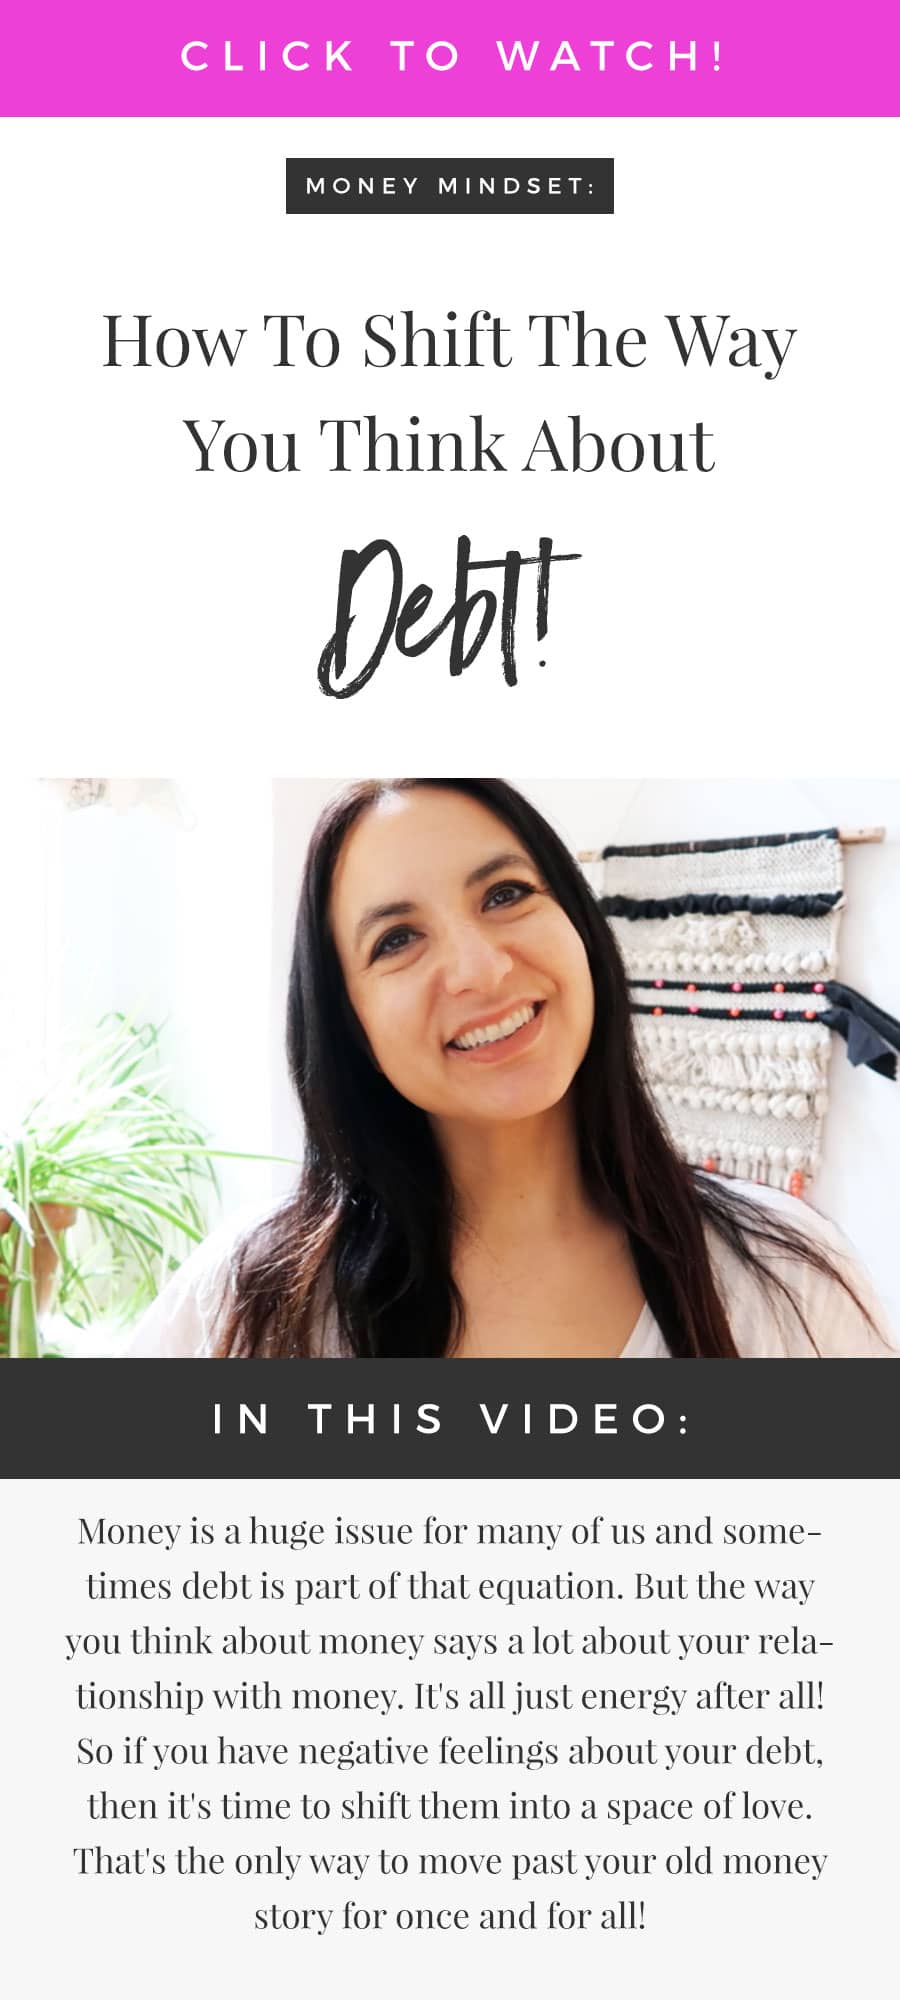 Money Mindset: How To Shift The Way You Think About Debt